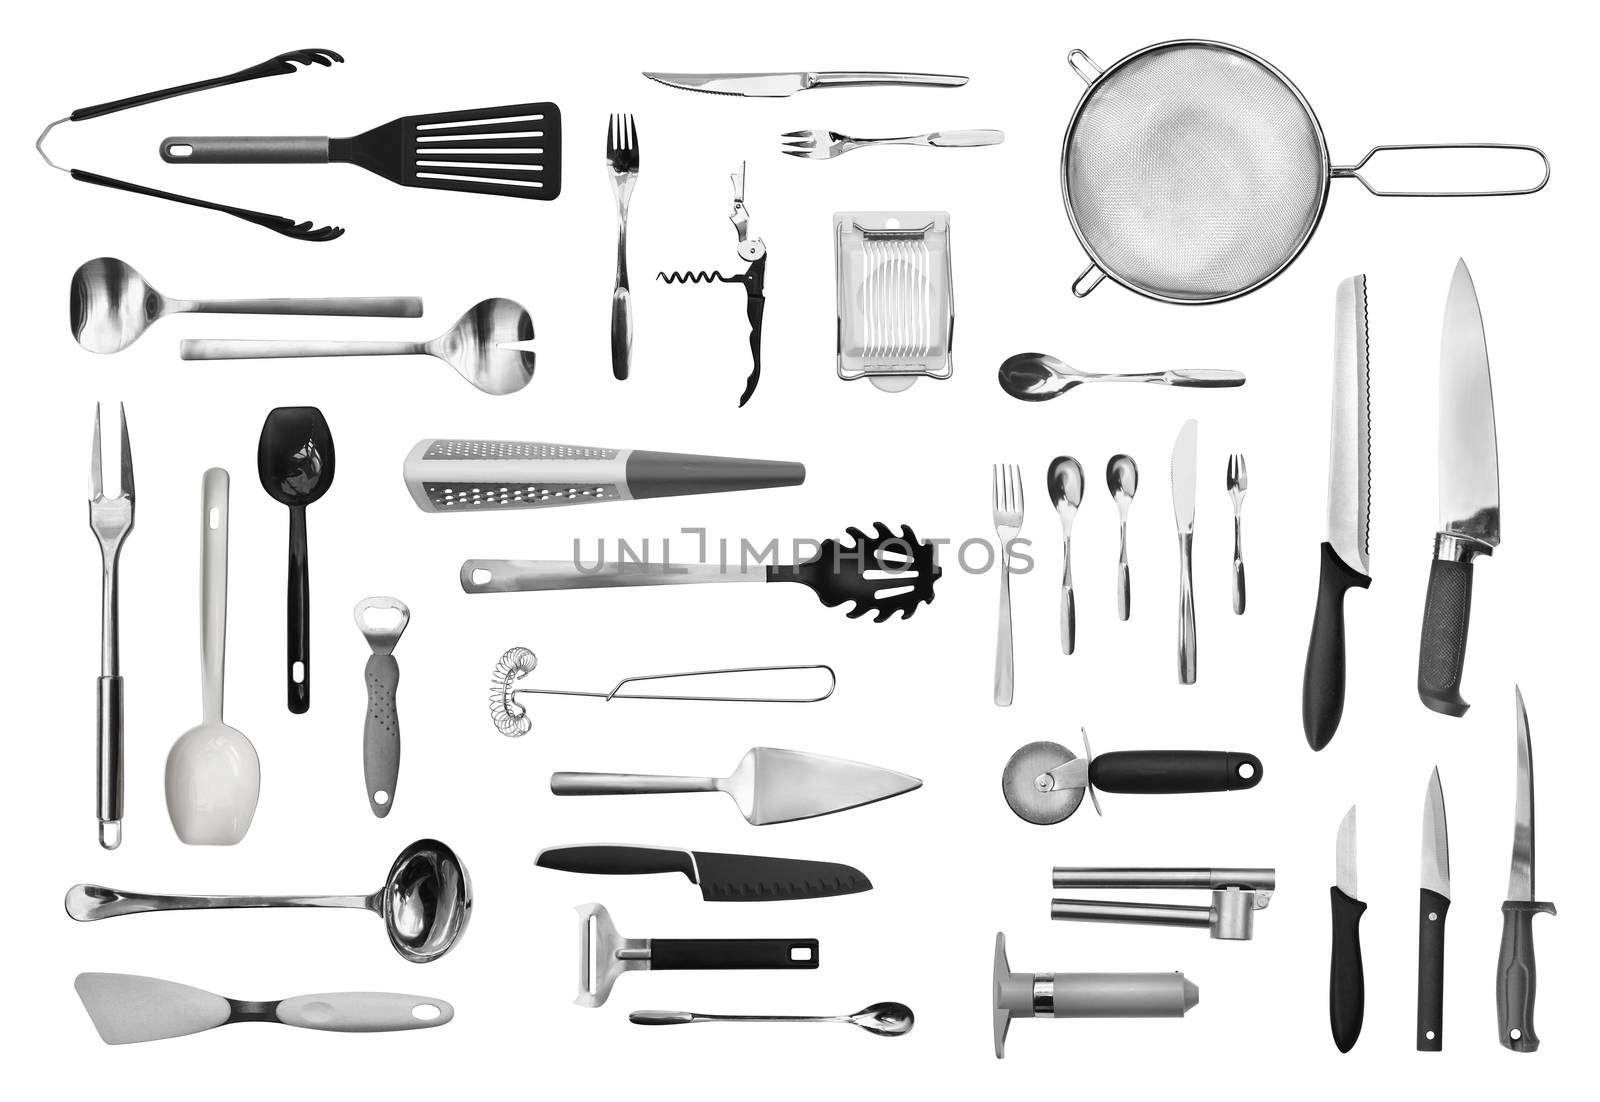 Realistic kitchen equipment and cutlery collection isolated on white